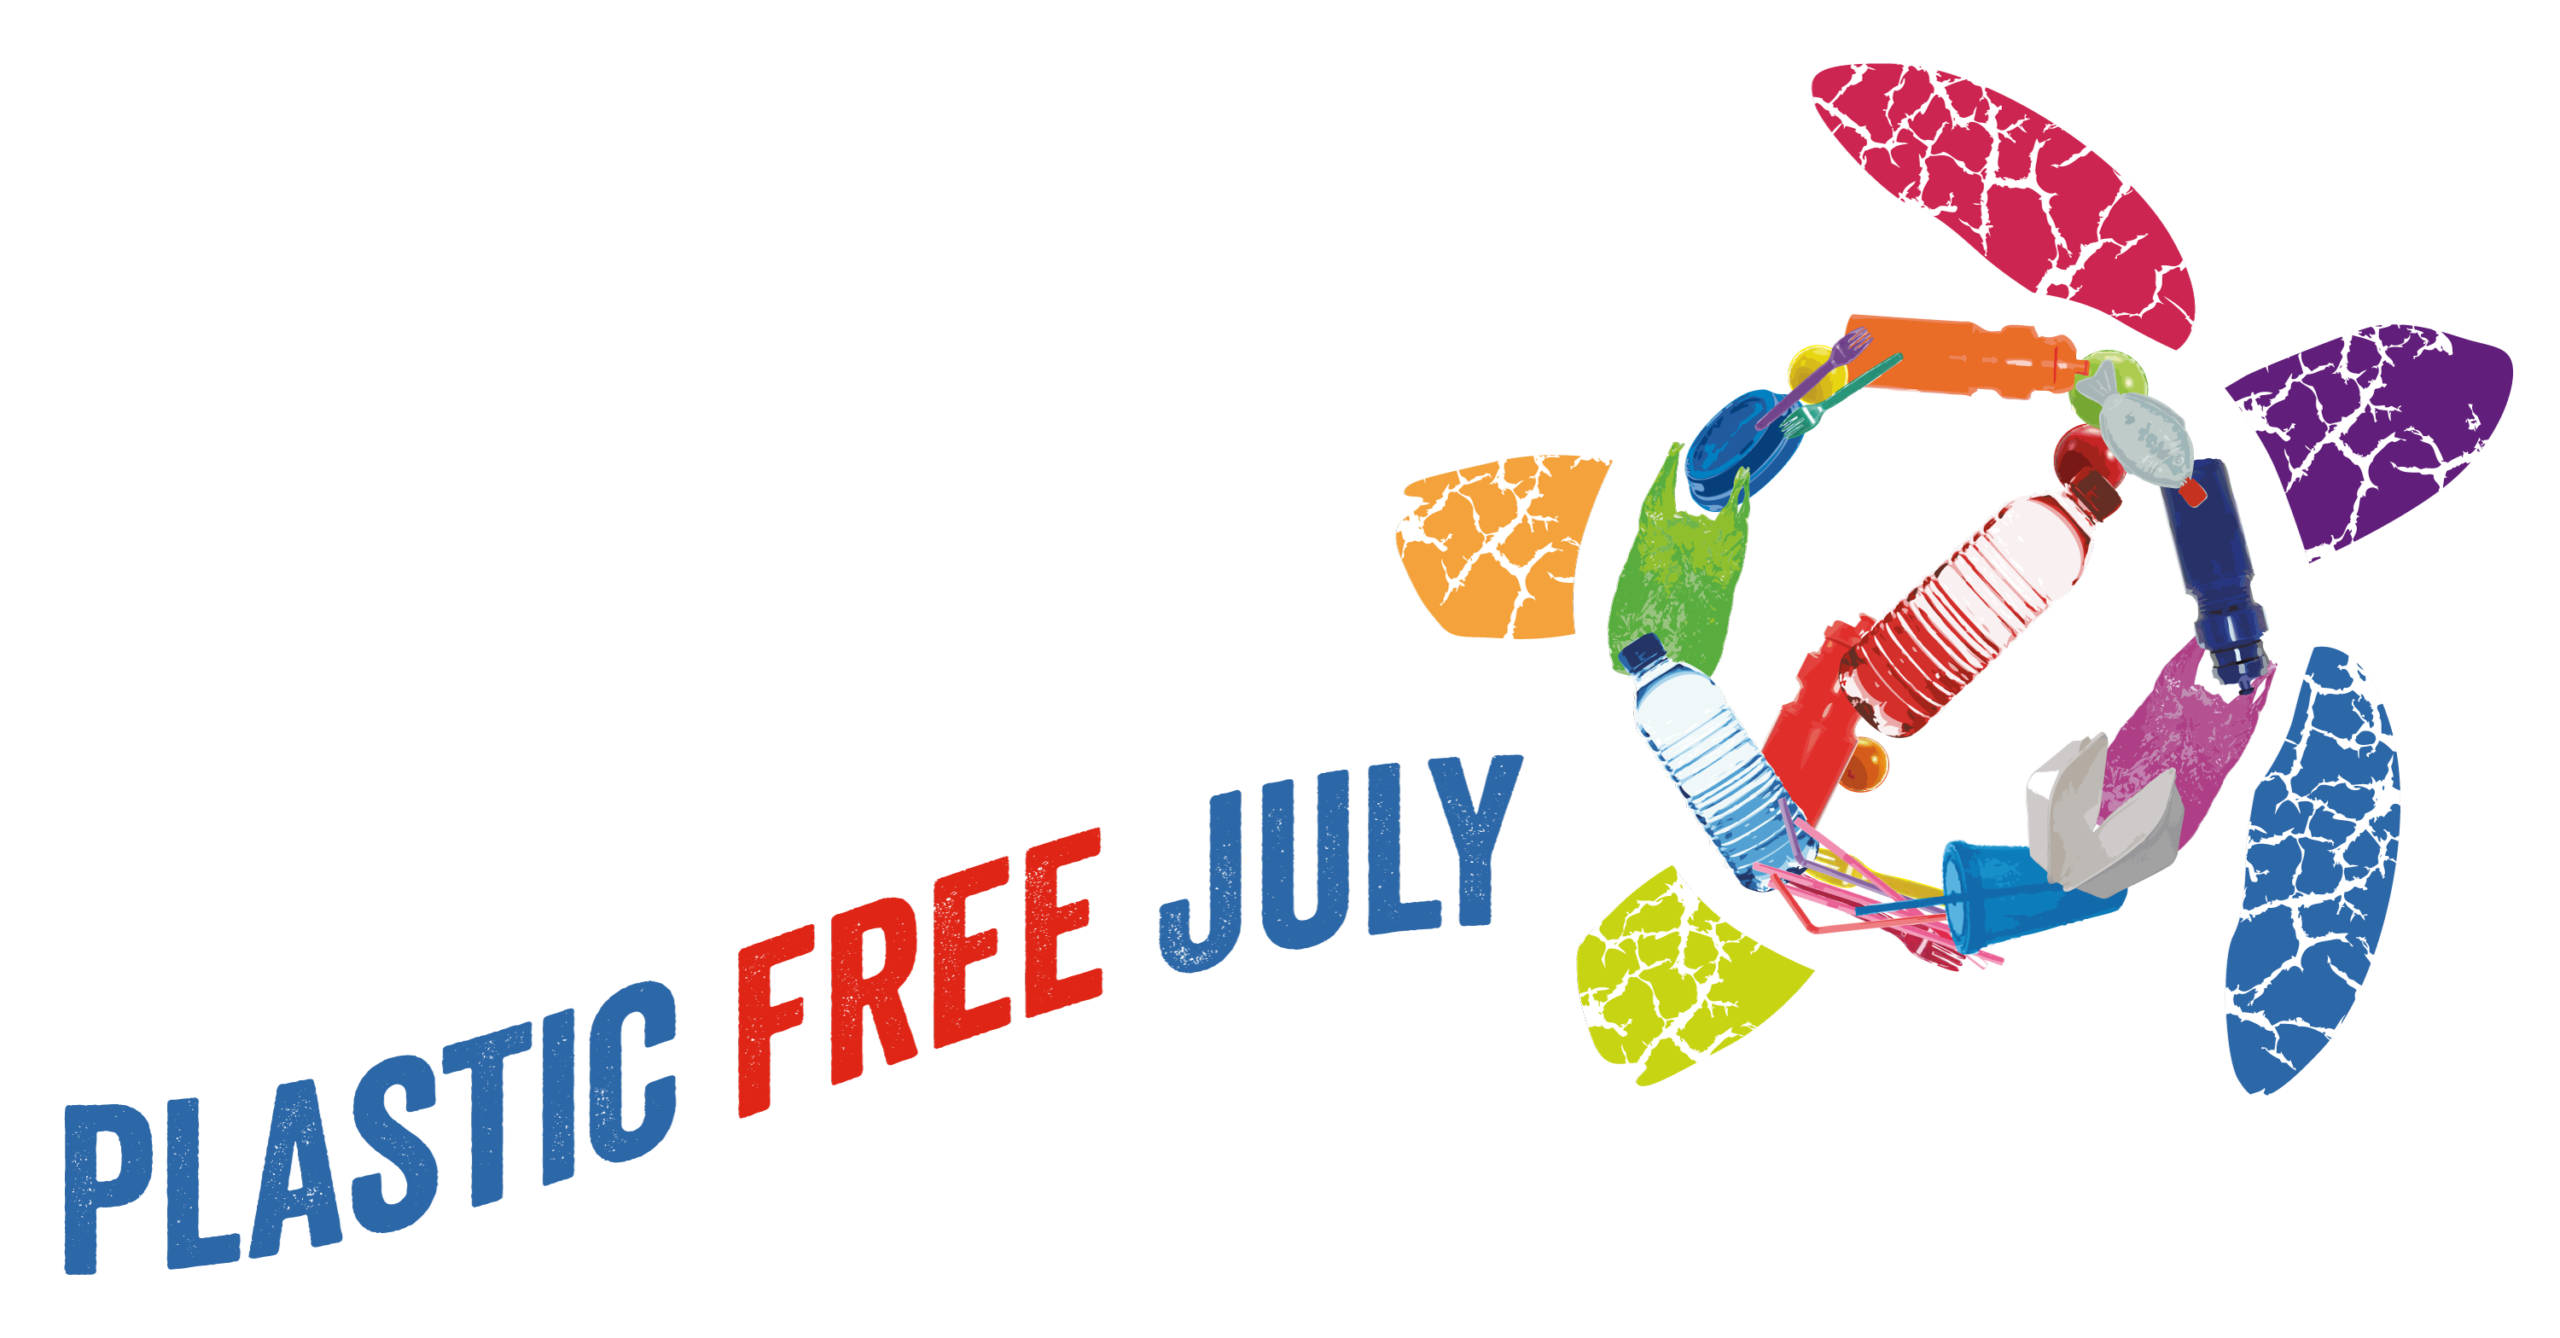 Plastic-Free July: Reducing Plastic Consumption in the Workplace